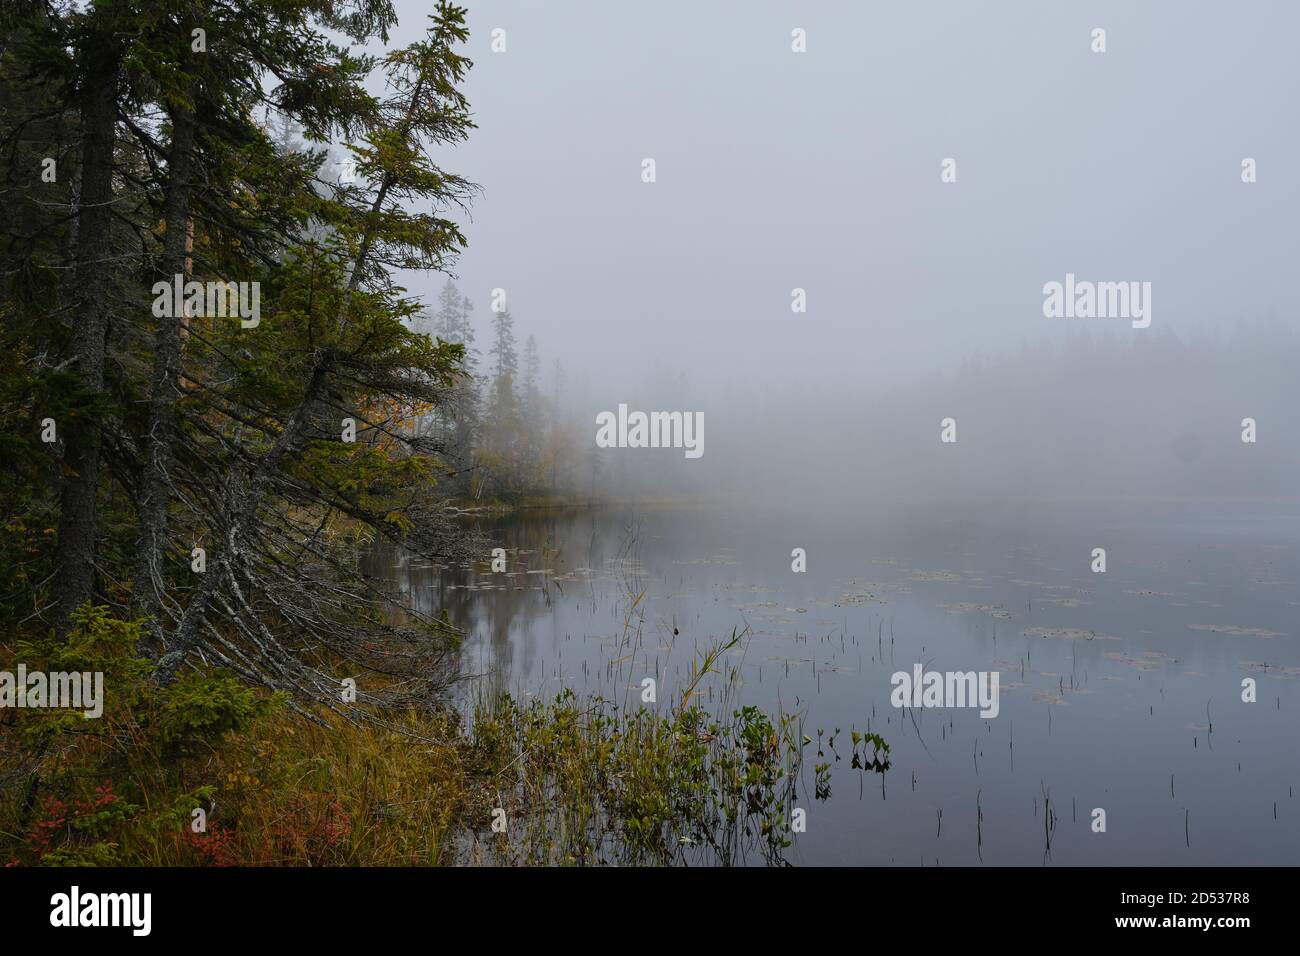 Autumn Photo of a lake and forest on a foggy morning Stock Photo